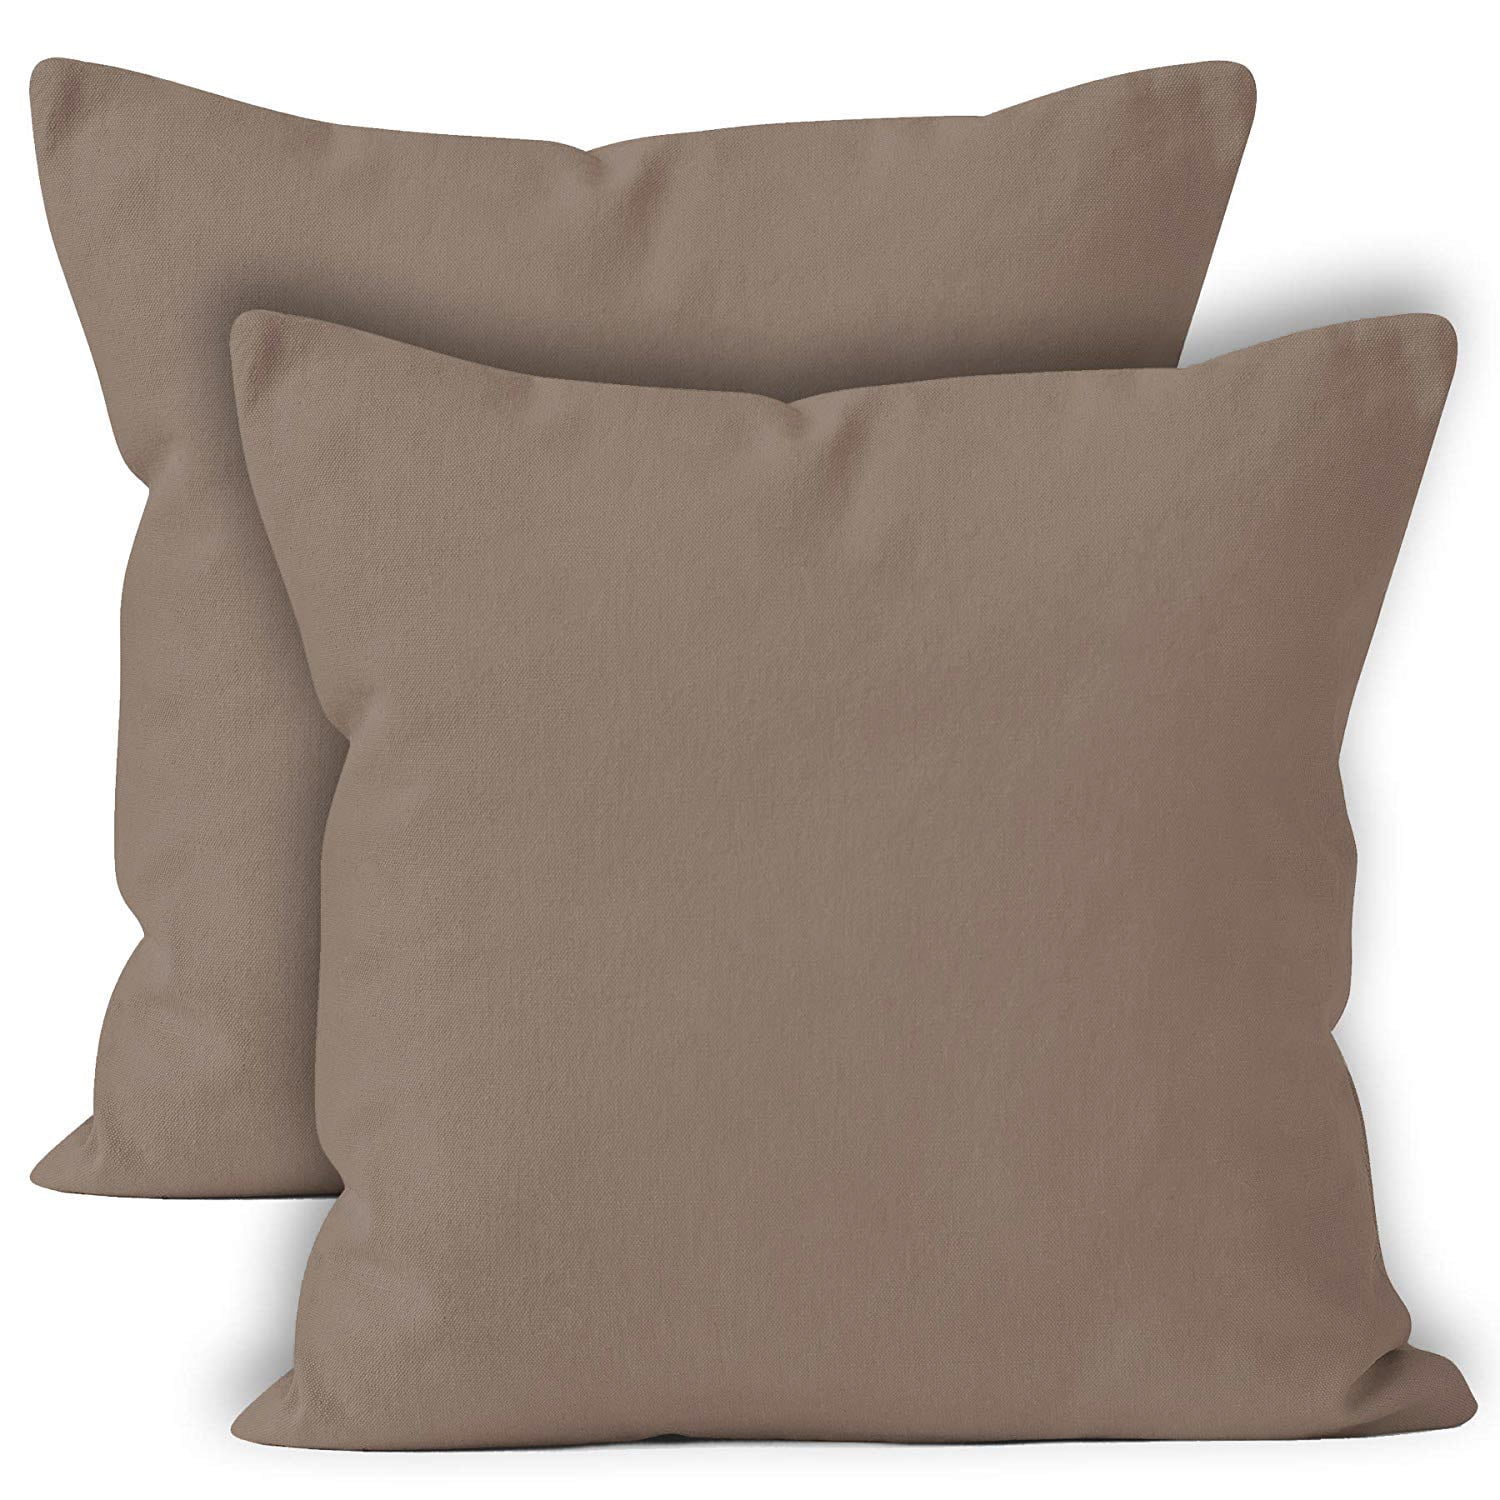 Taupe Encasa Solid Dyed Cotton Square Cushion Cover 20 x 20 Inch 